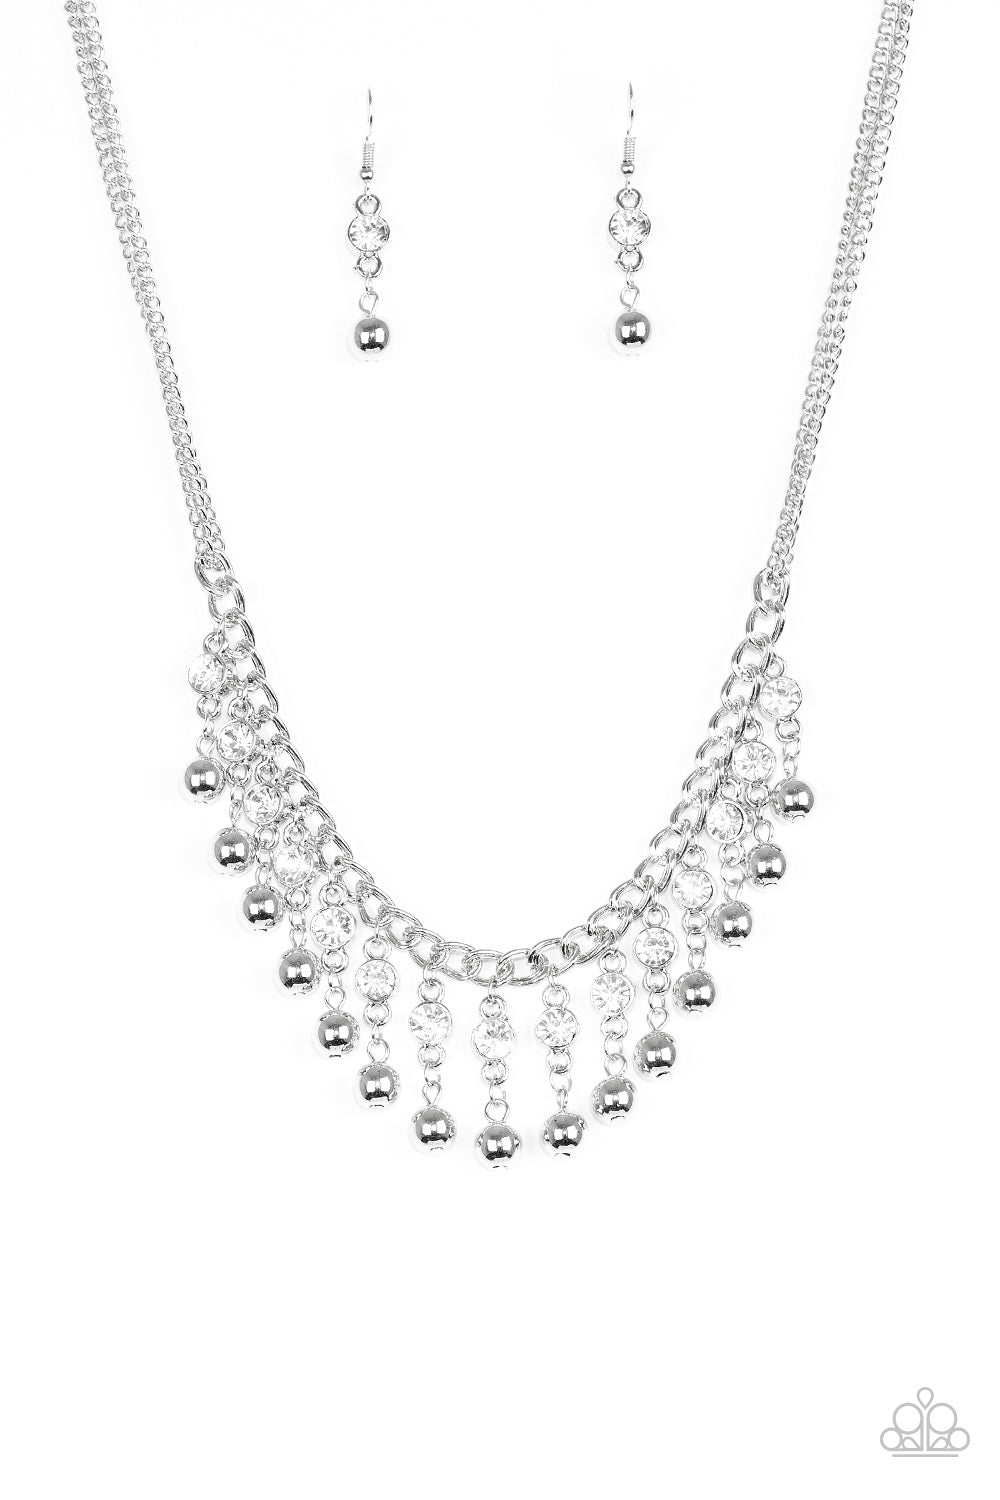 Paparazzi Pagent Queen Fringe Necklace - White